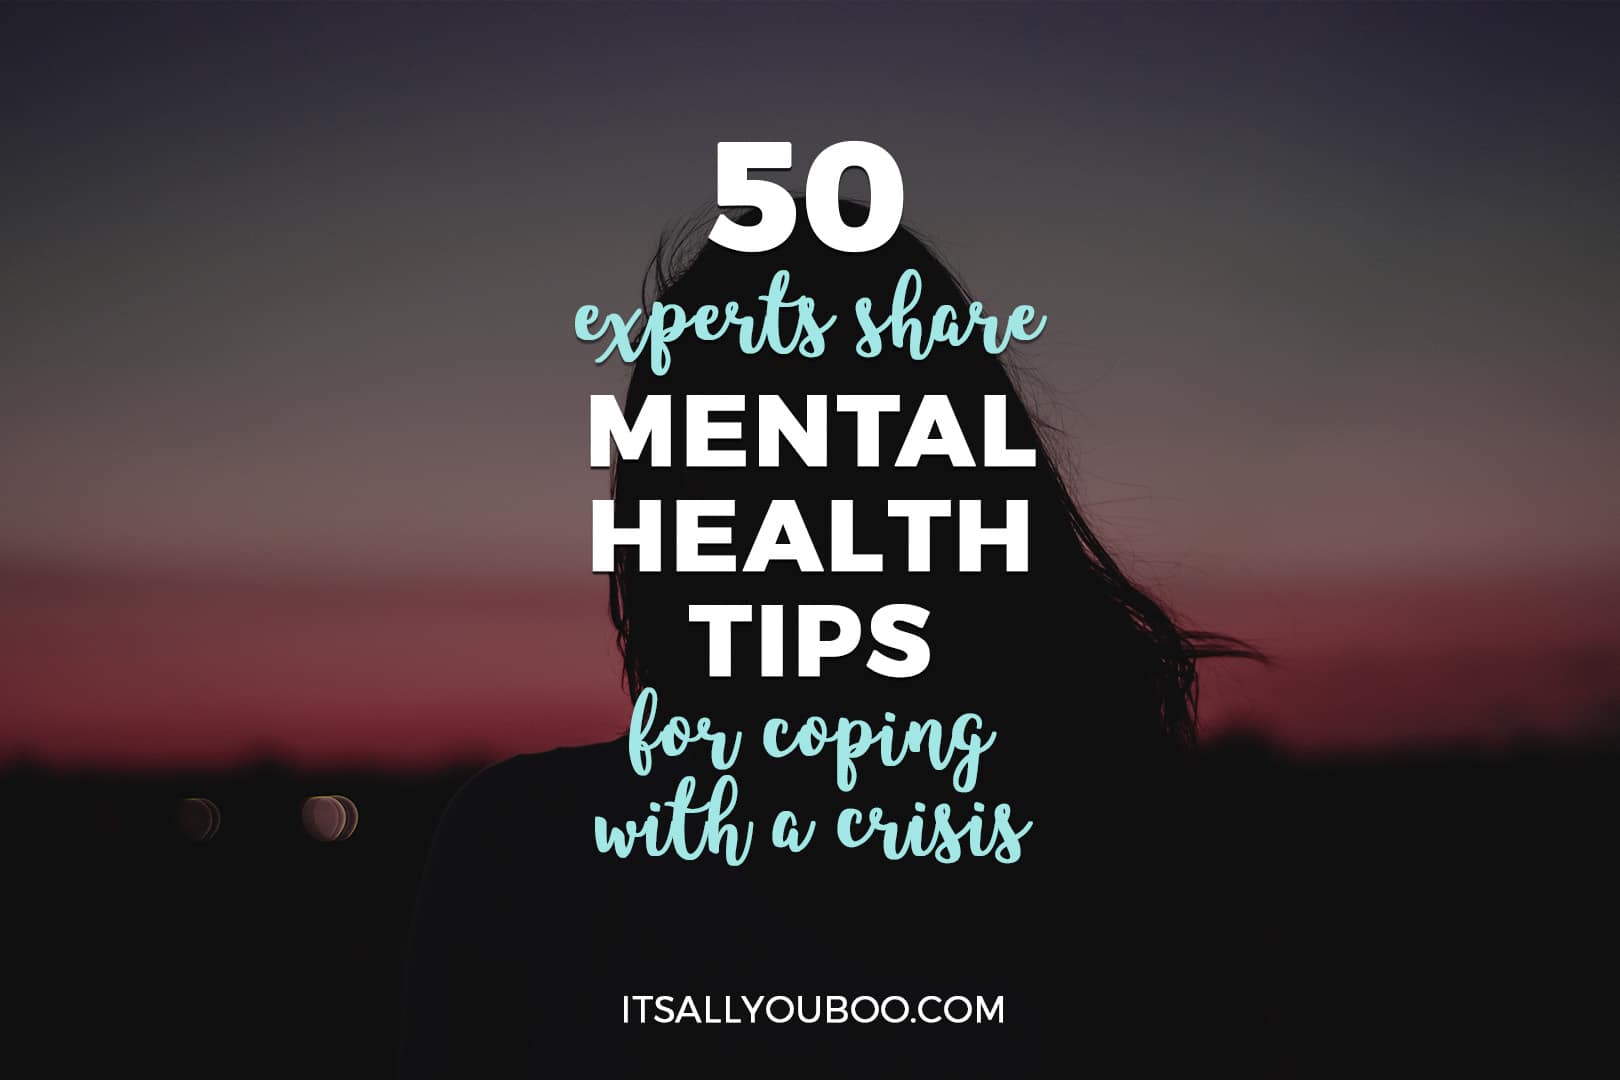 50 Experts Share Mental Health Tips for Coping with a Crisis